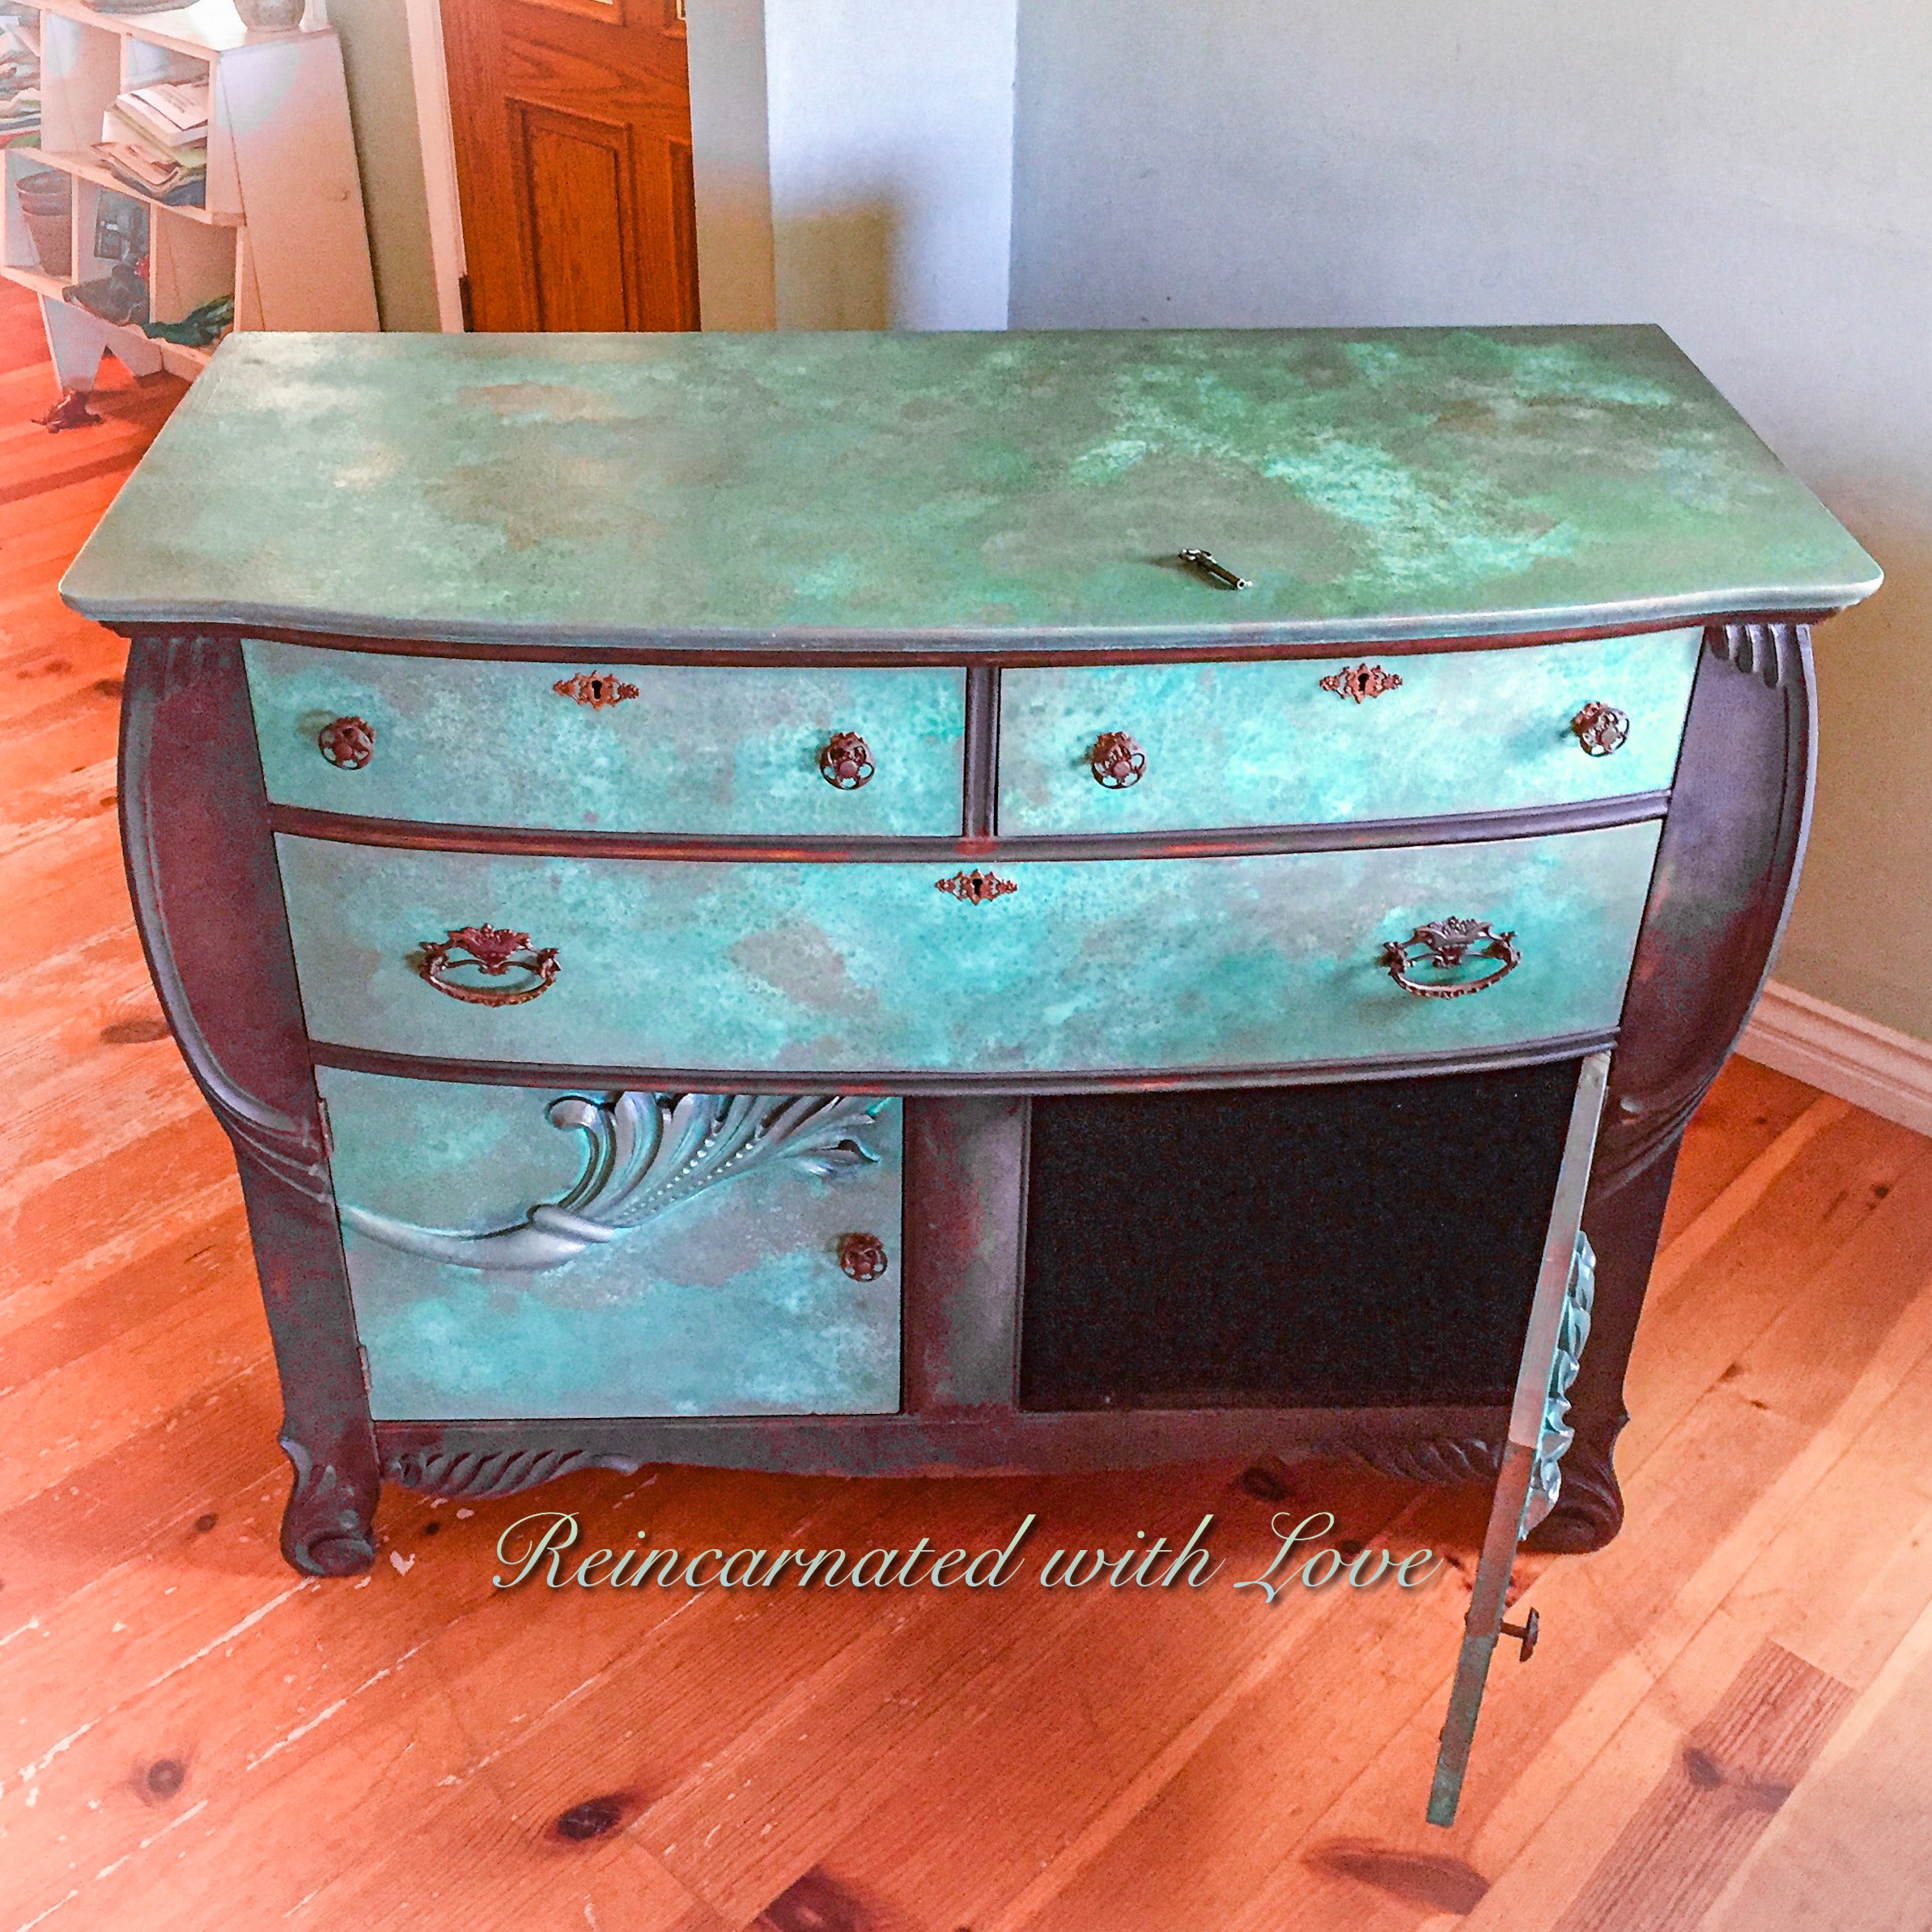 An antique dresser with art nouveau style, wood carved accents & a boho finish, done in rusted iron & green, copper patina.